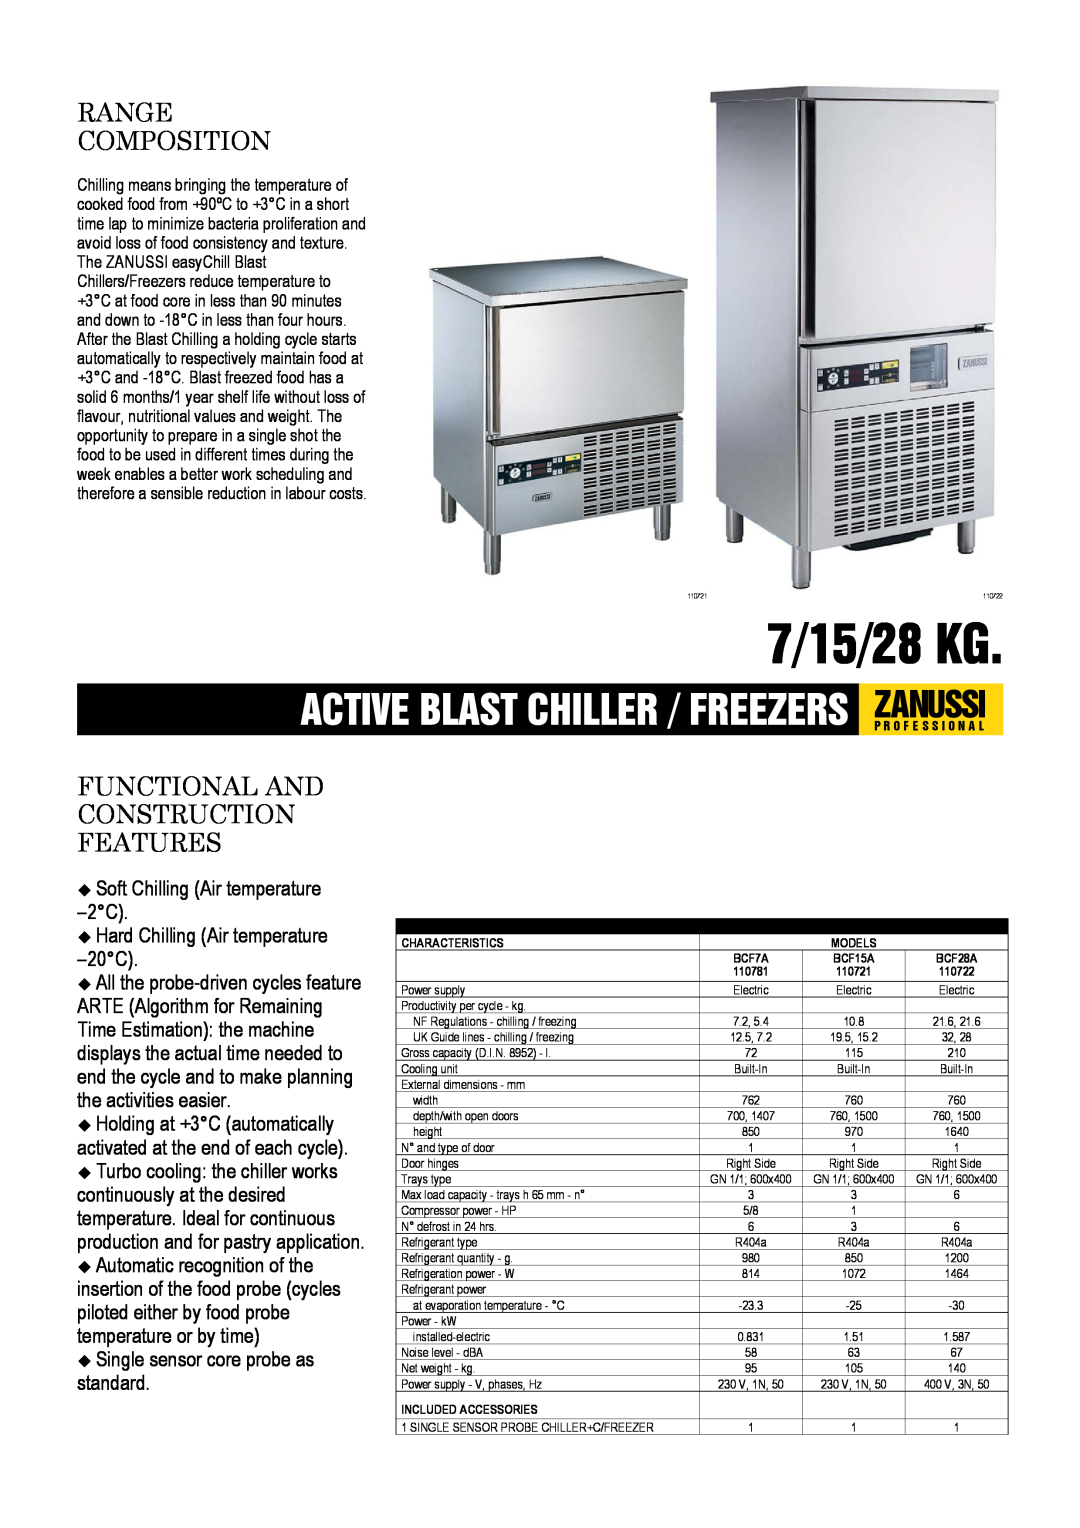 Zanussi BCF7A, BCF15A, BCF28A, 110781, 110721 dimensions 7/15/28 KG, Range Composition, Functional And Construction Features 